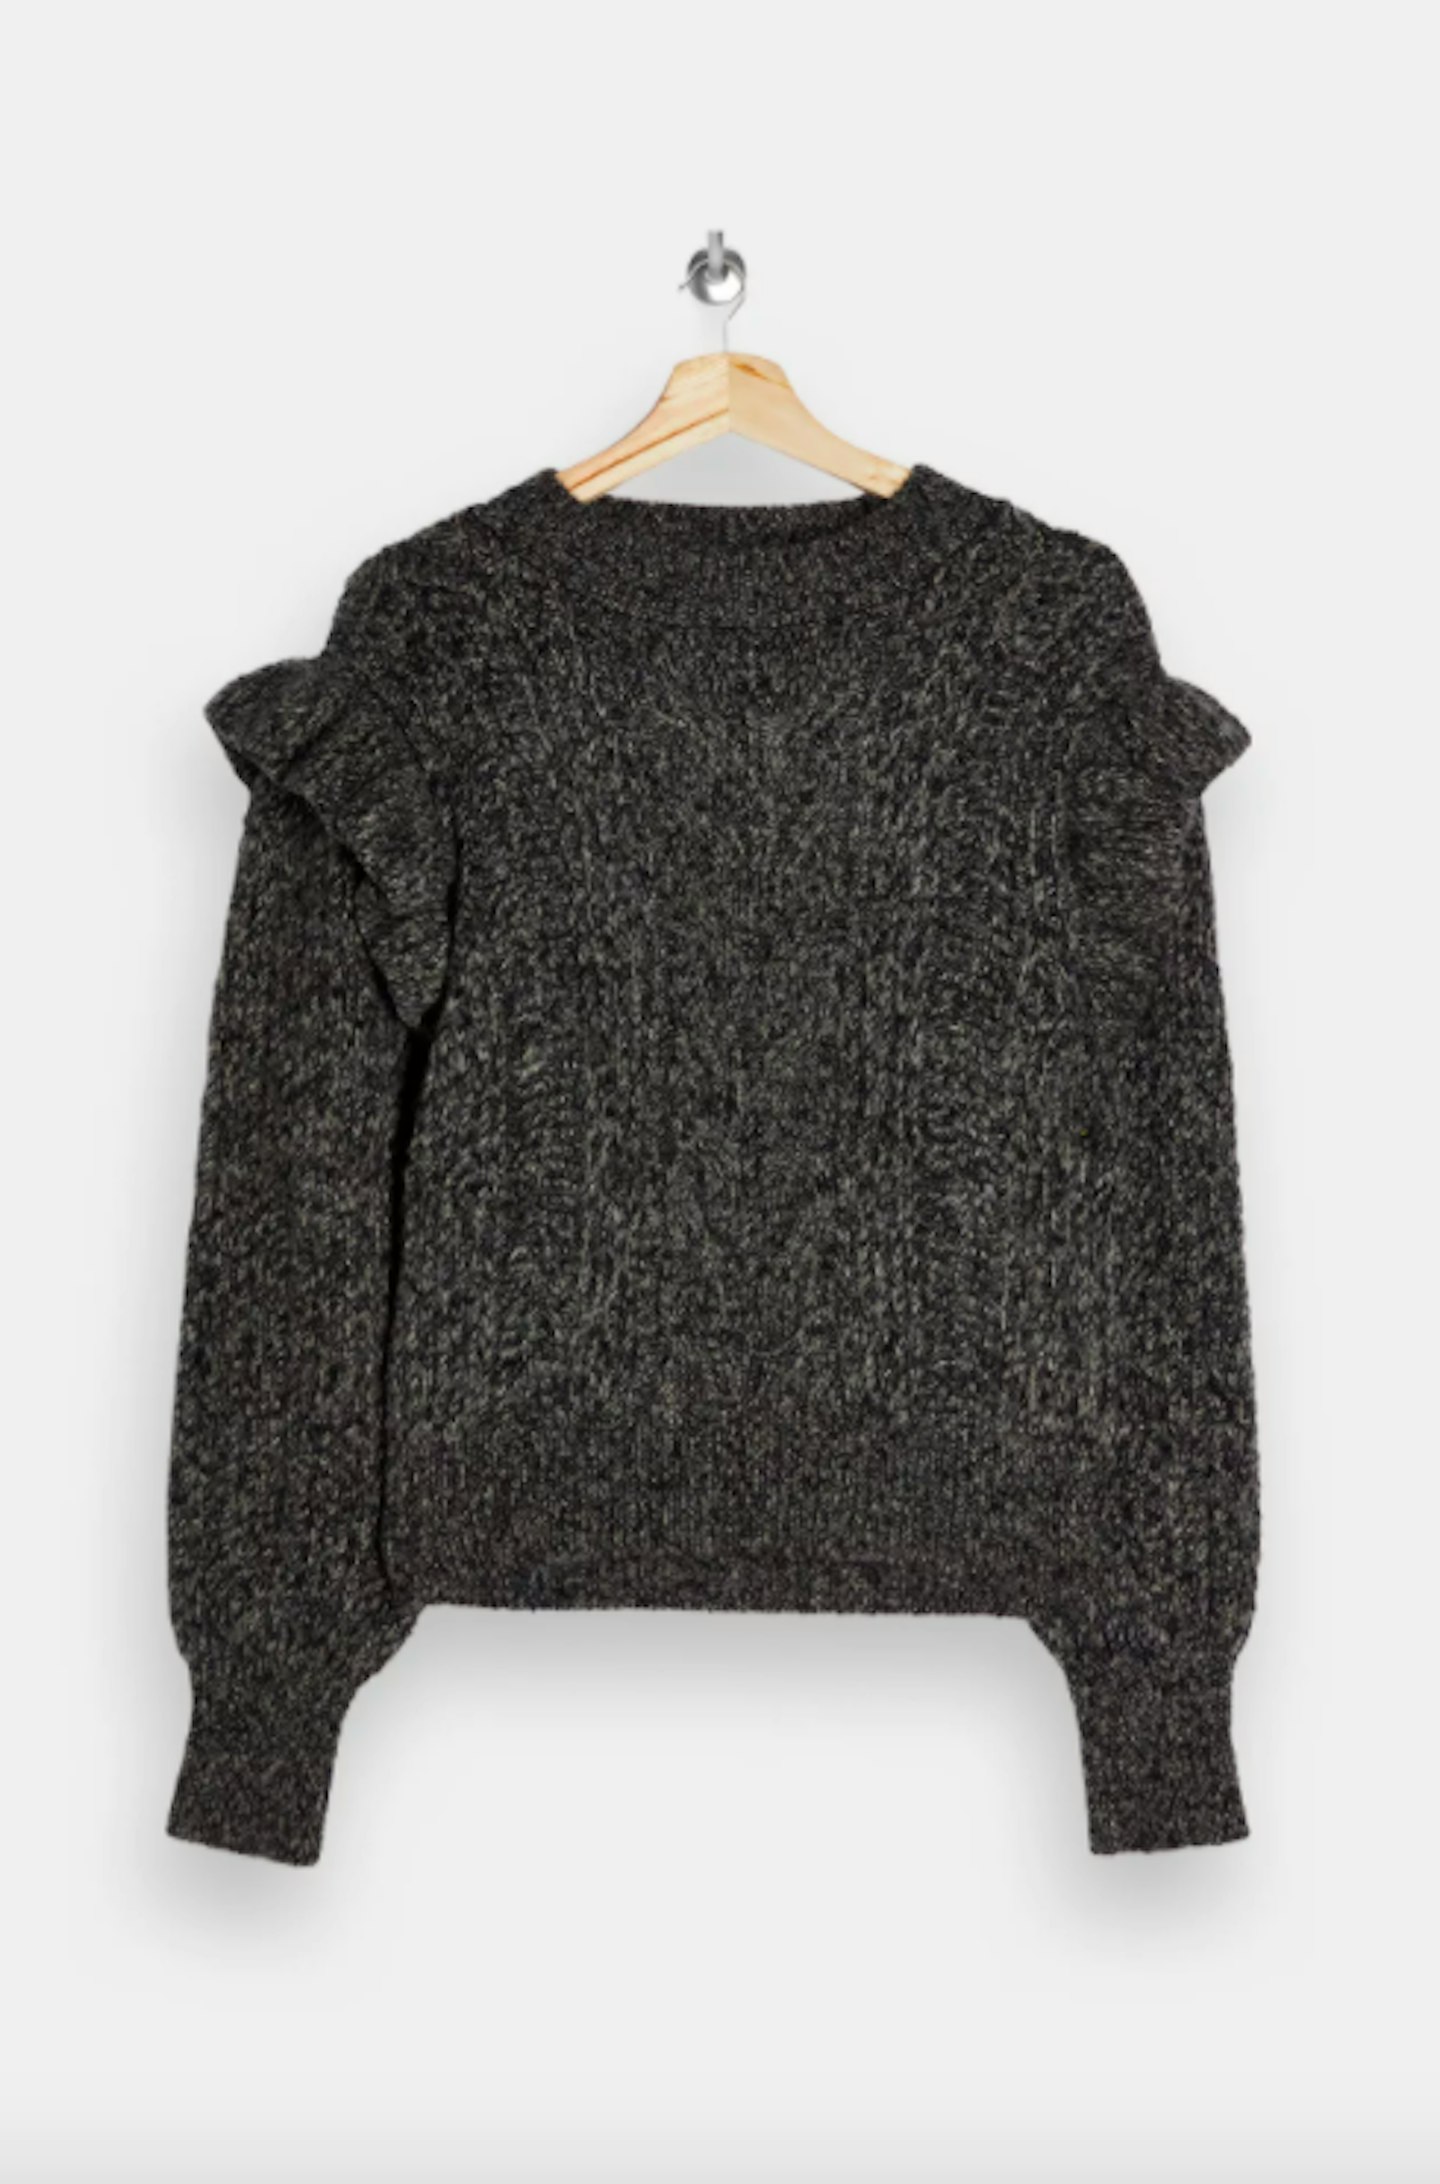 Topshop, Idol Charcoal Grey Frill Sleeve Knitted Jumper, £39.99